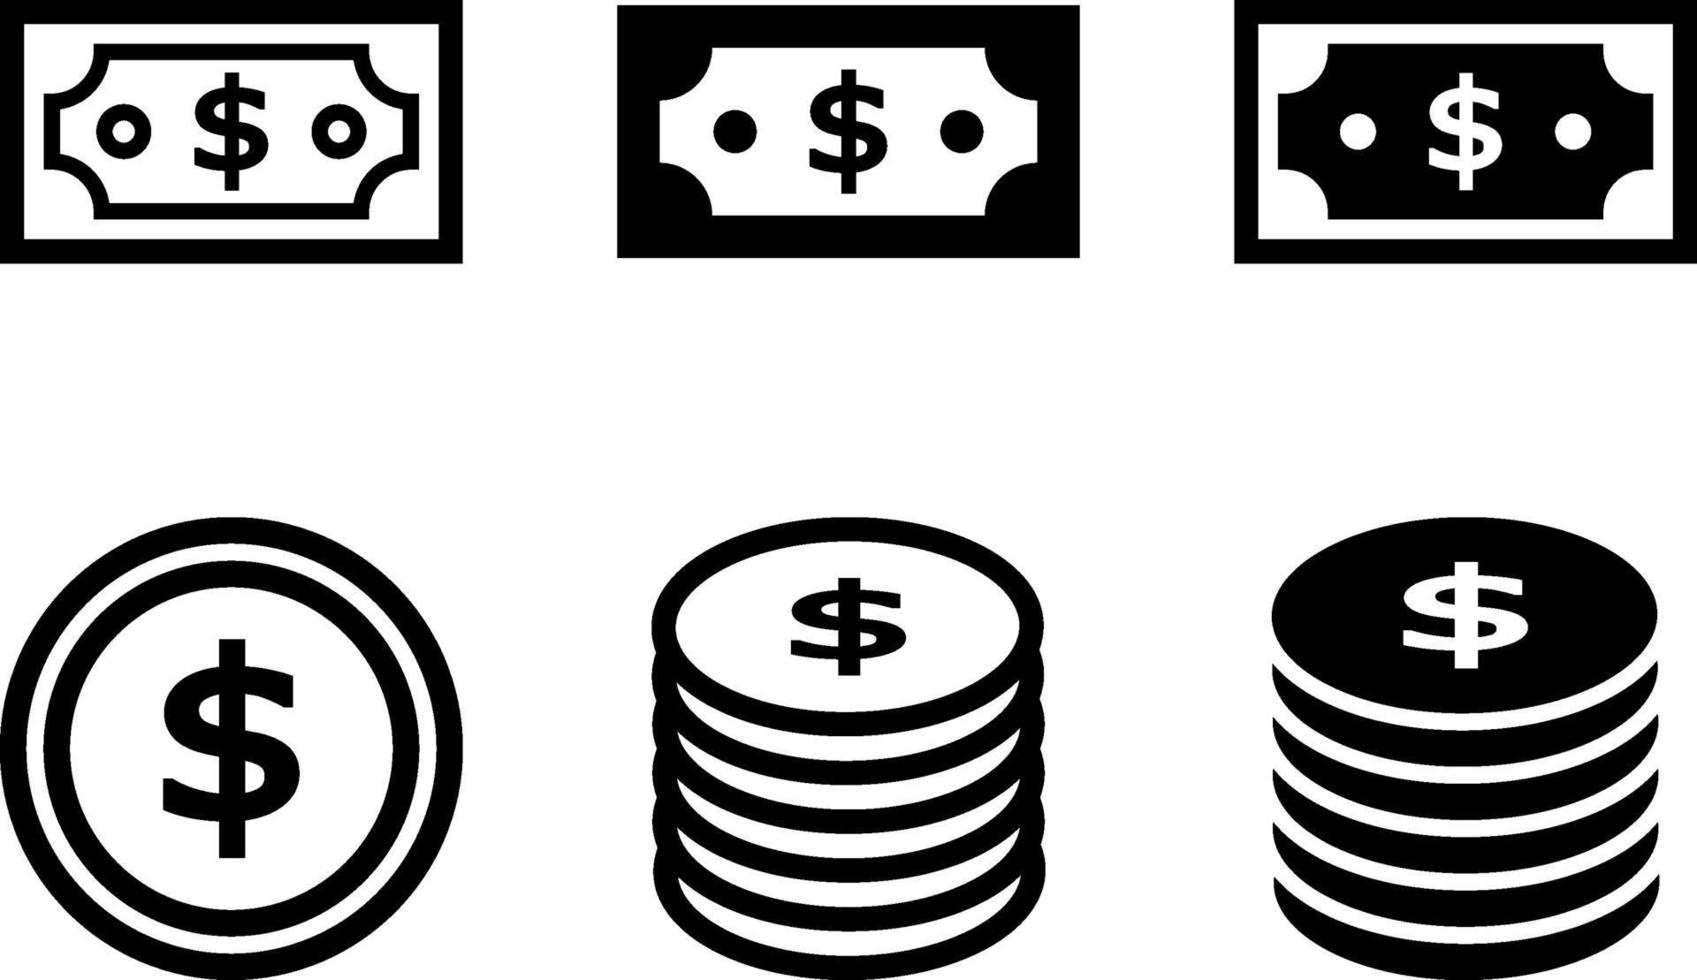 Paper Currency and Coin Set vector